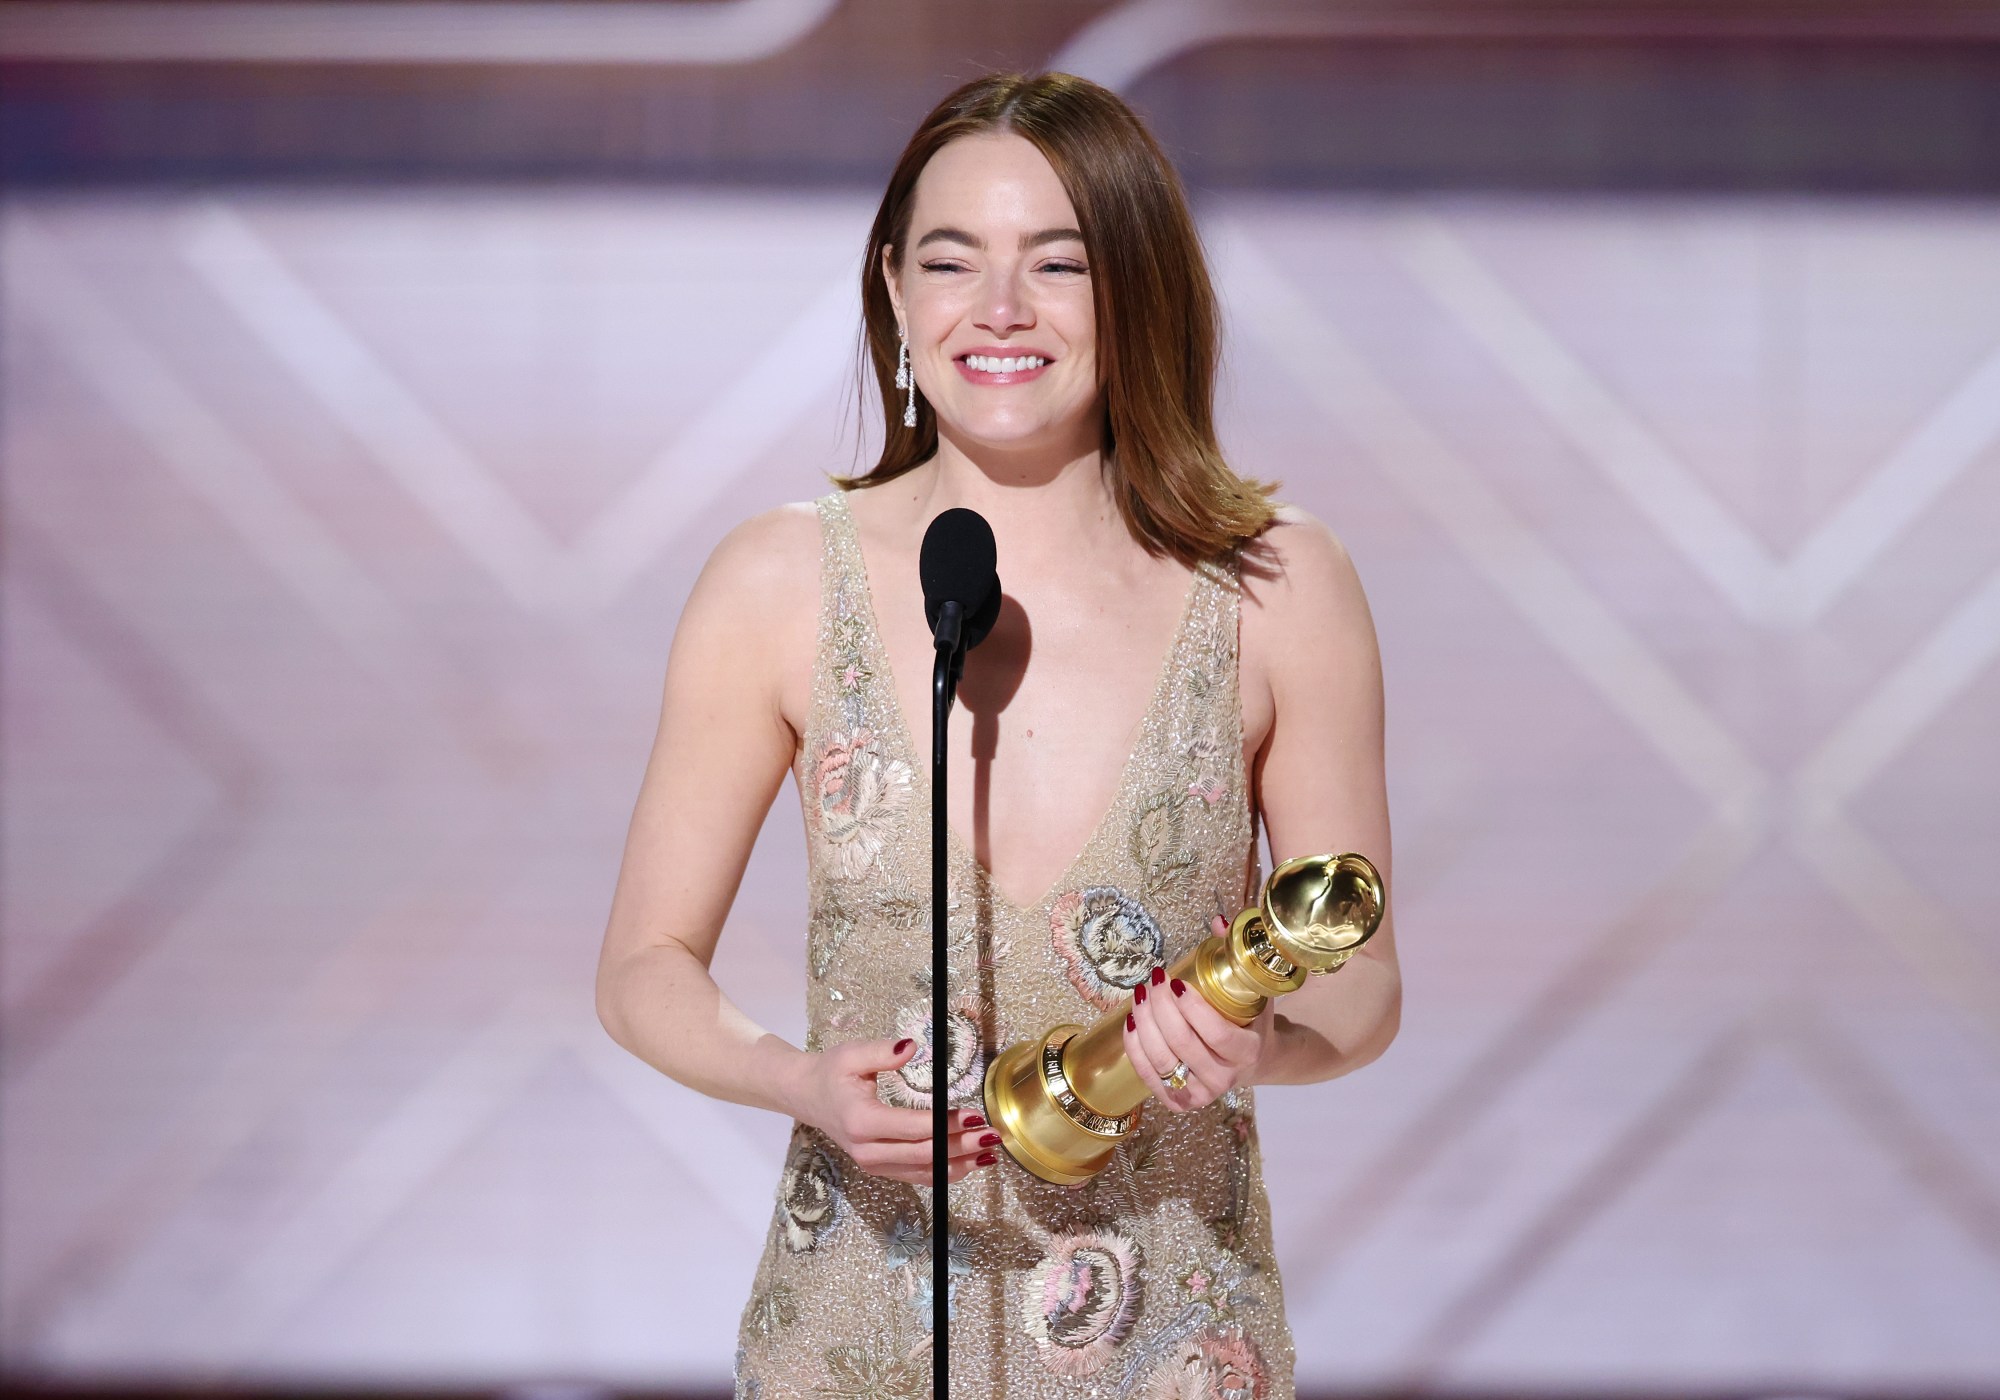 Emma Stone accepts the award for Best Performance by a Female Actor in a Motion Picture